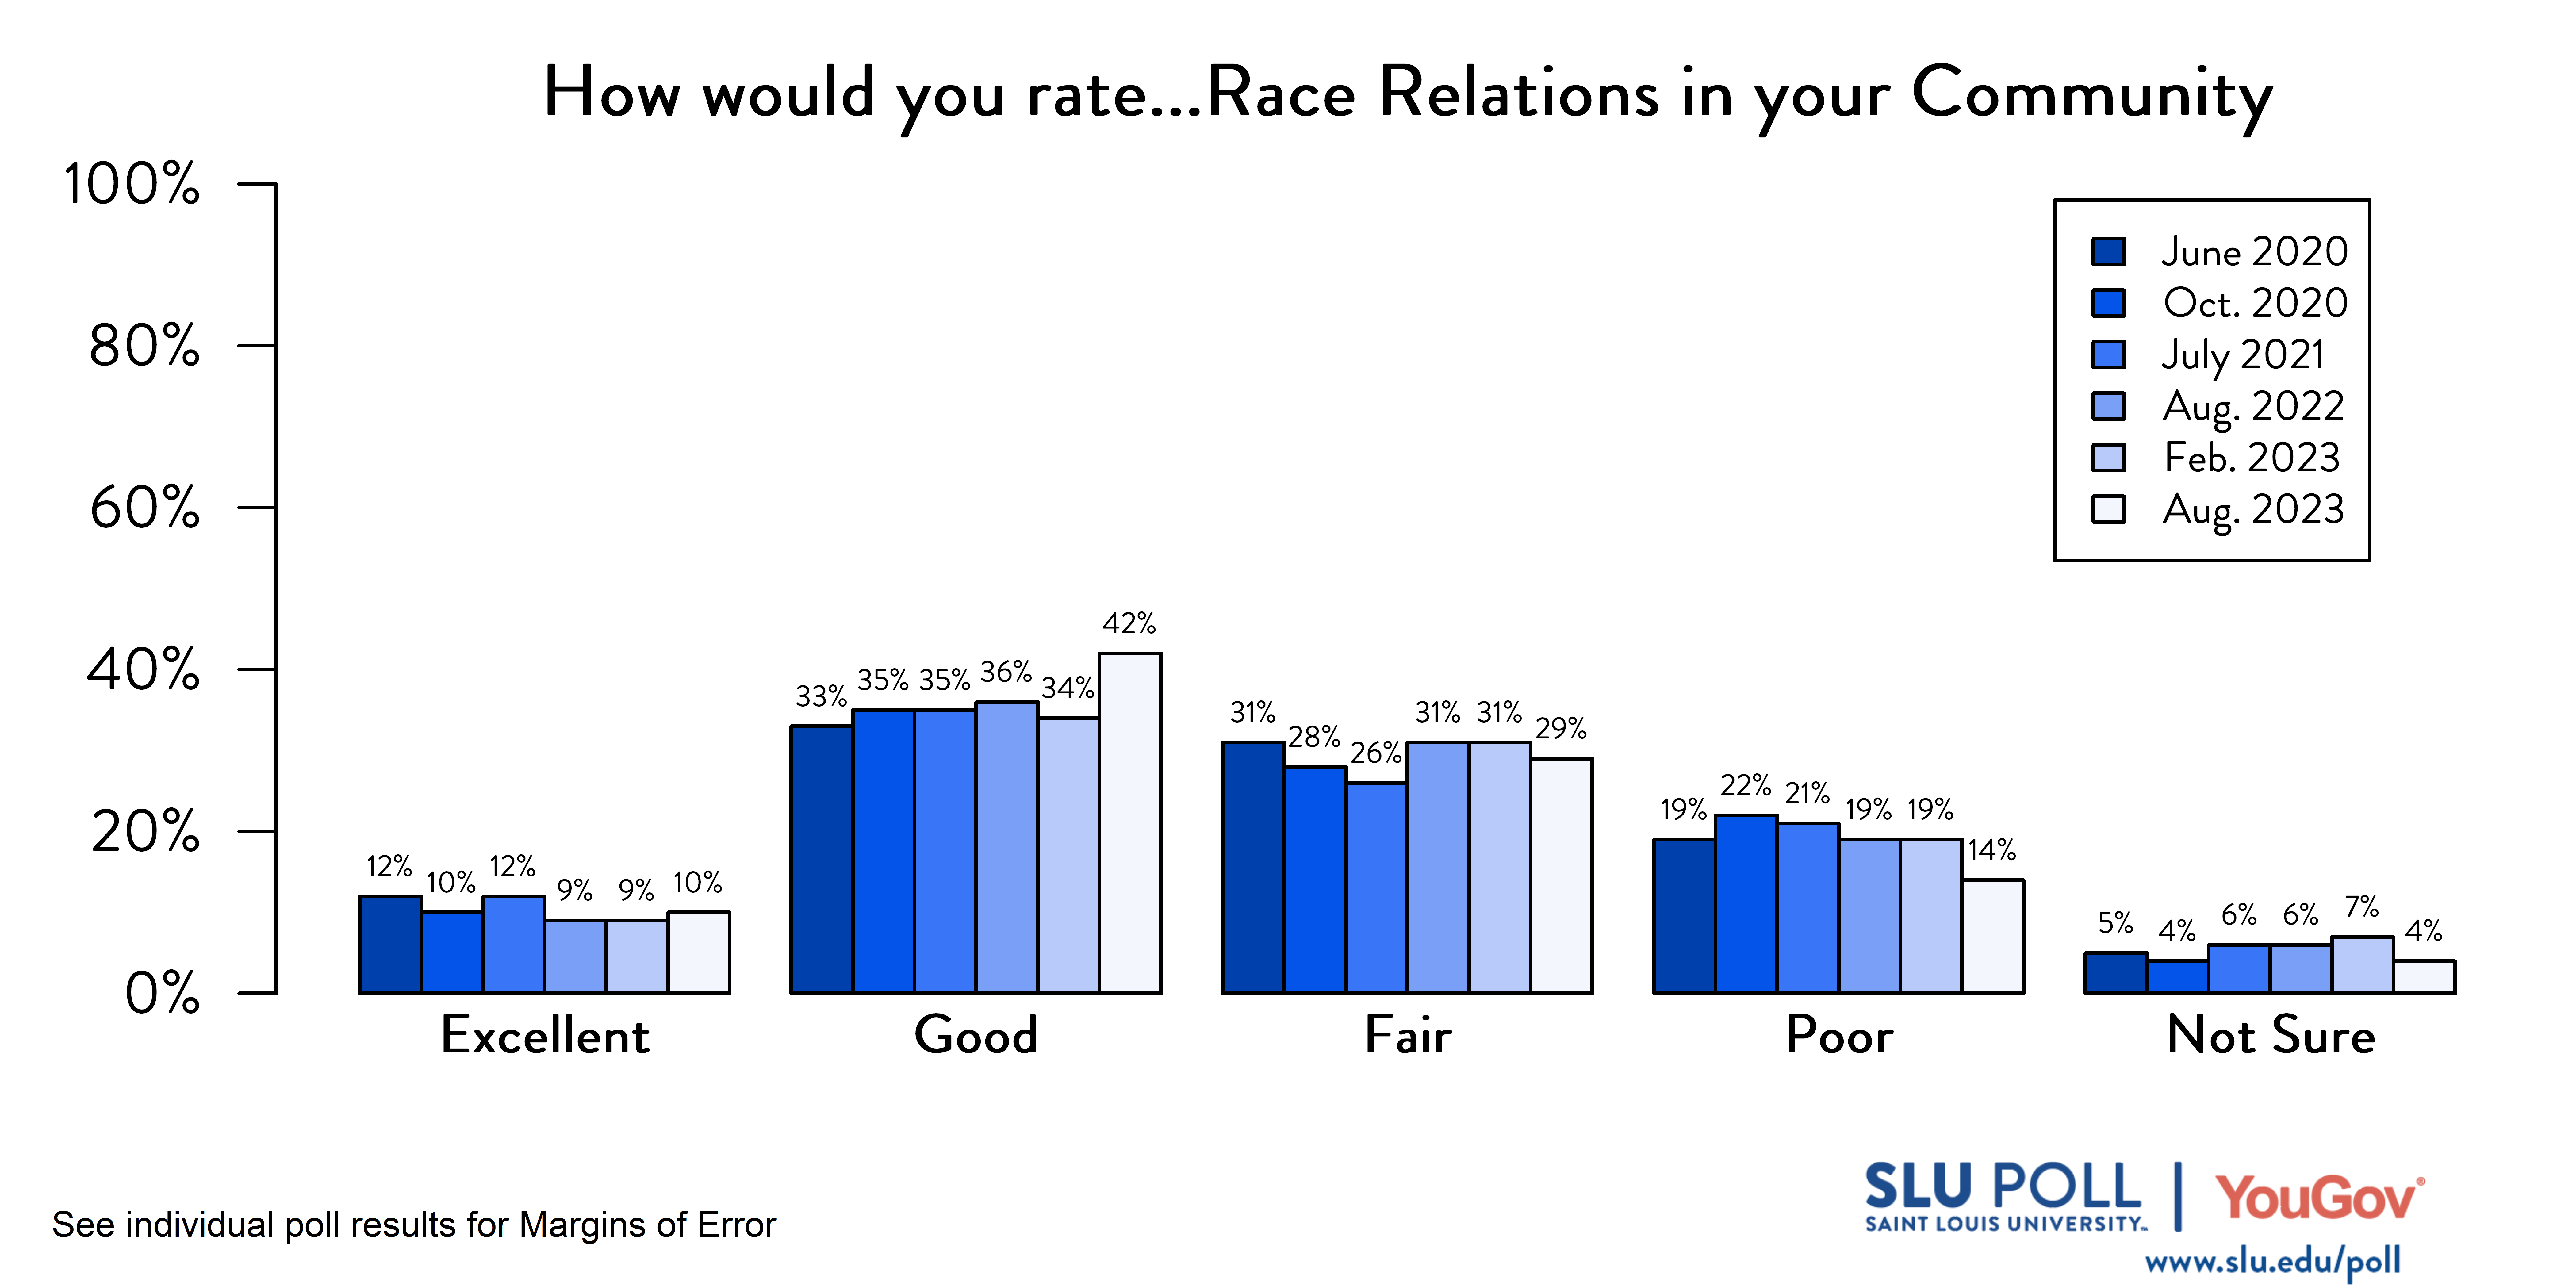 Likely voters' responses to 'How would you rate the condition of the following: Race relations in your community?'. June 2020 Voter Responses 12% Excellent, 33% Good, 31% Fair, 19% Poor, and 5% Not Sure. October 2020 Voter Responses: 10% Excellent, 35% Good, 28% Fair, 22% Poor, and 4% Not sure. July 2021 Voter Responses: 12% Excellent, 35% Good, 26% Fair, 21% Poor, and 6% Not sure. August 2022 Voter Responses: 9% Excellent, 36% Good, 31% Fair, 19% Poor, and 6% Not sure. February 2023 Voter Responses: 9% Excellent, 34% Good, 31% Fair, 19% Poor, and 7% Not sure. August 2023 Voter Responses: 10% Excellent, 42% Good, 29% Fair, 14% Poor, and 4% Not sure.